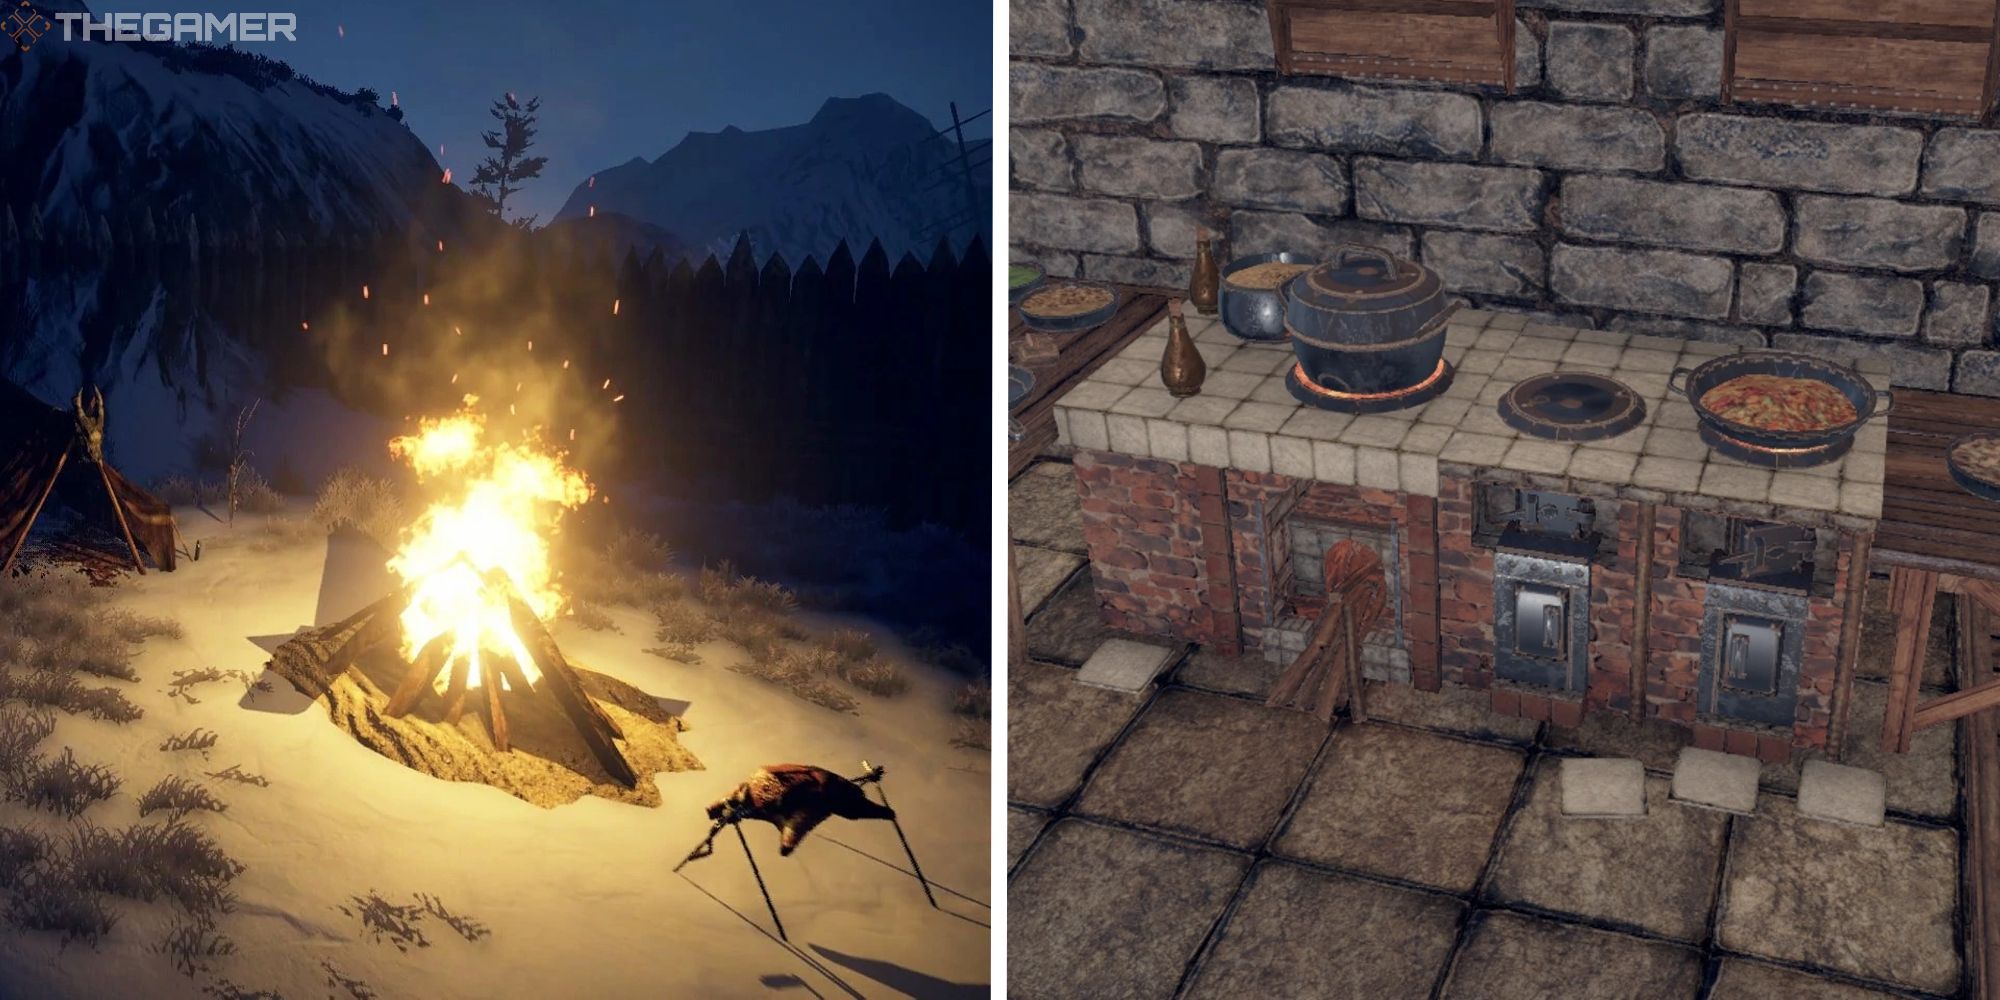 image of campfire next to image of kitchen